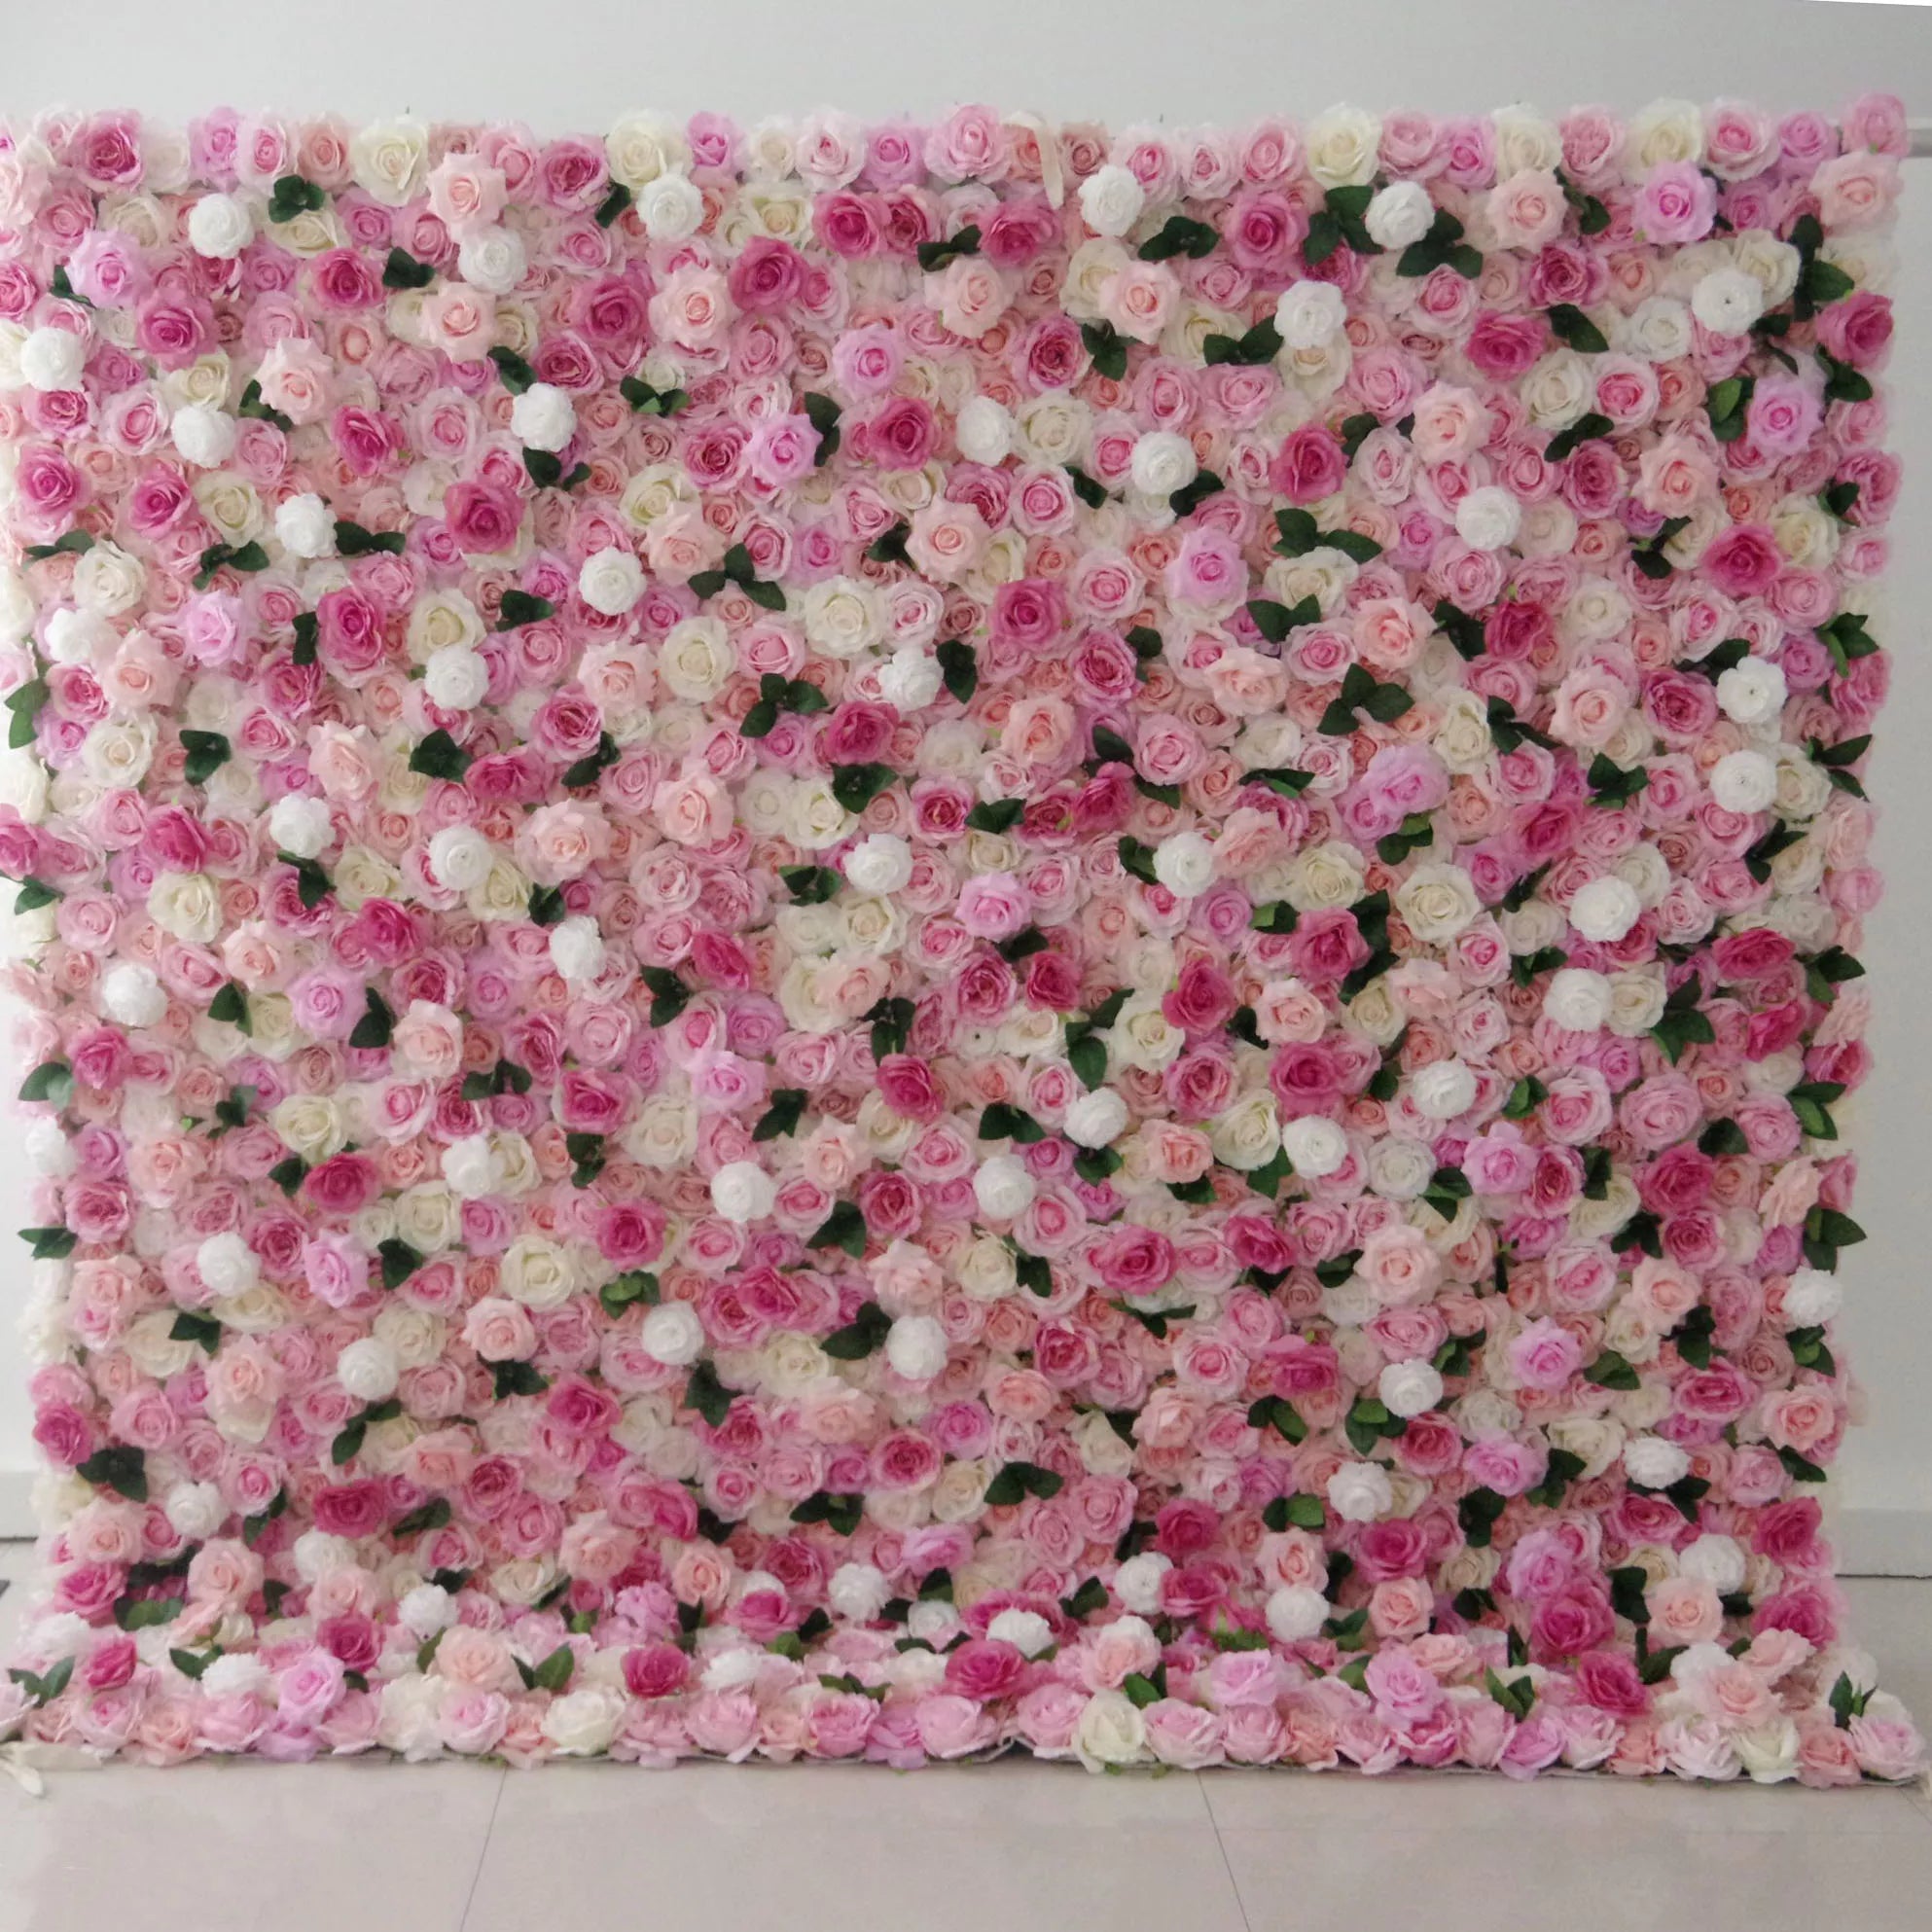 Valar Flowers artificial mixed pink and white floral wall roll up fabric for wedding backdrop, floral party decor, and event photography, model VF-0840